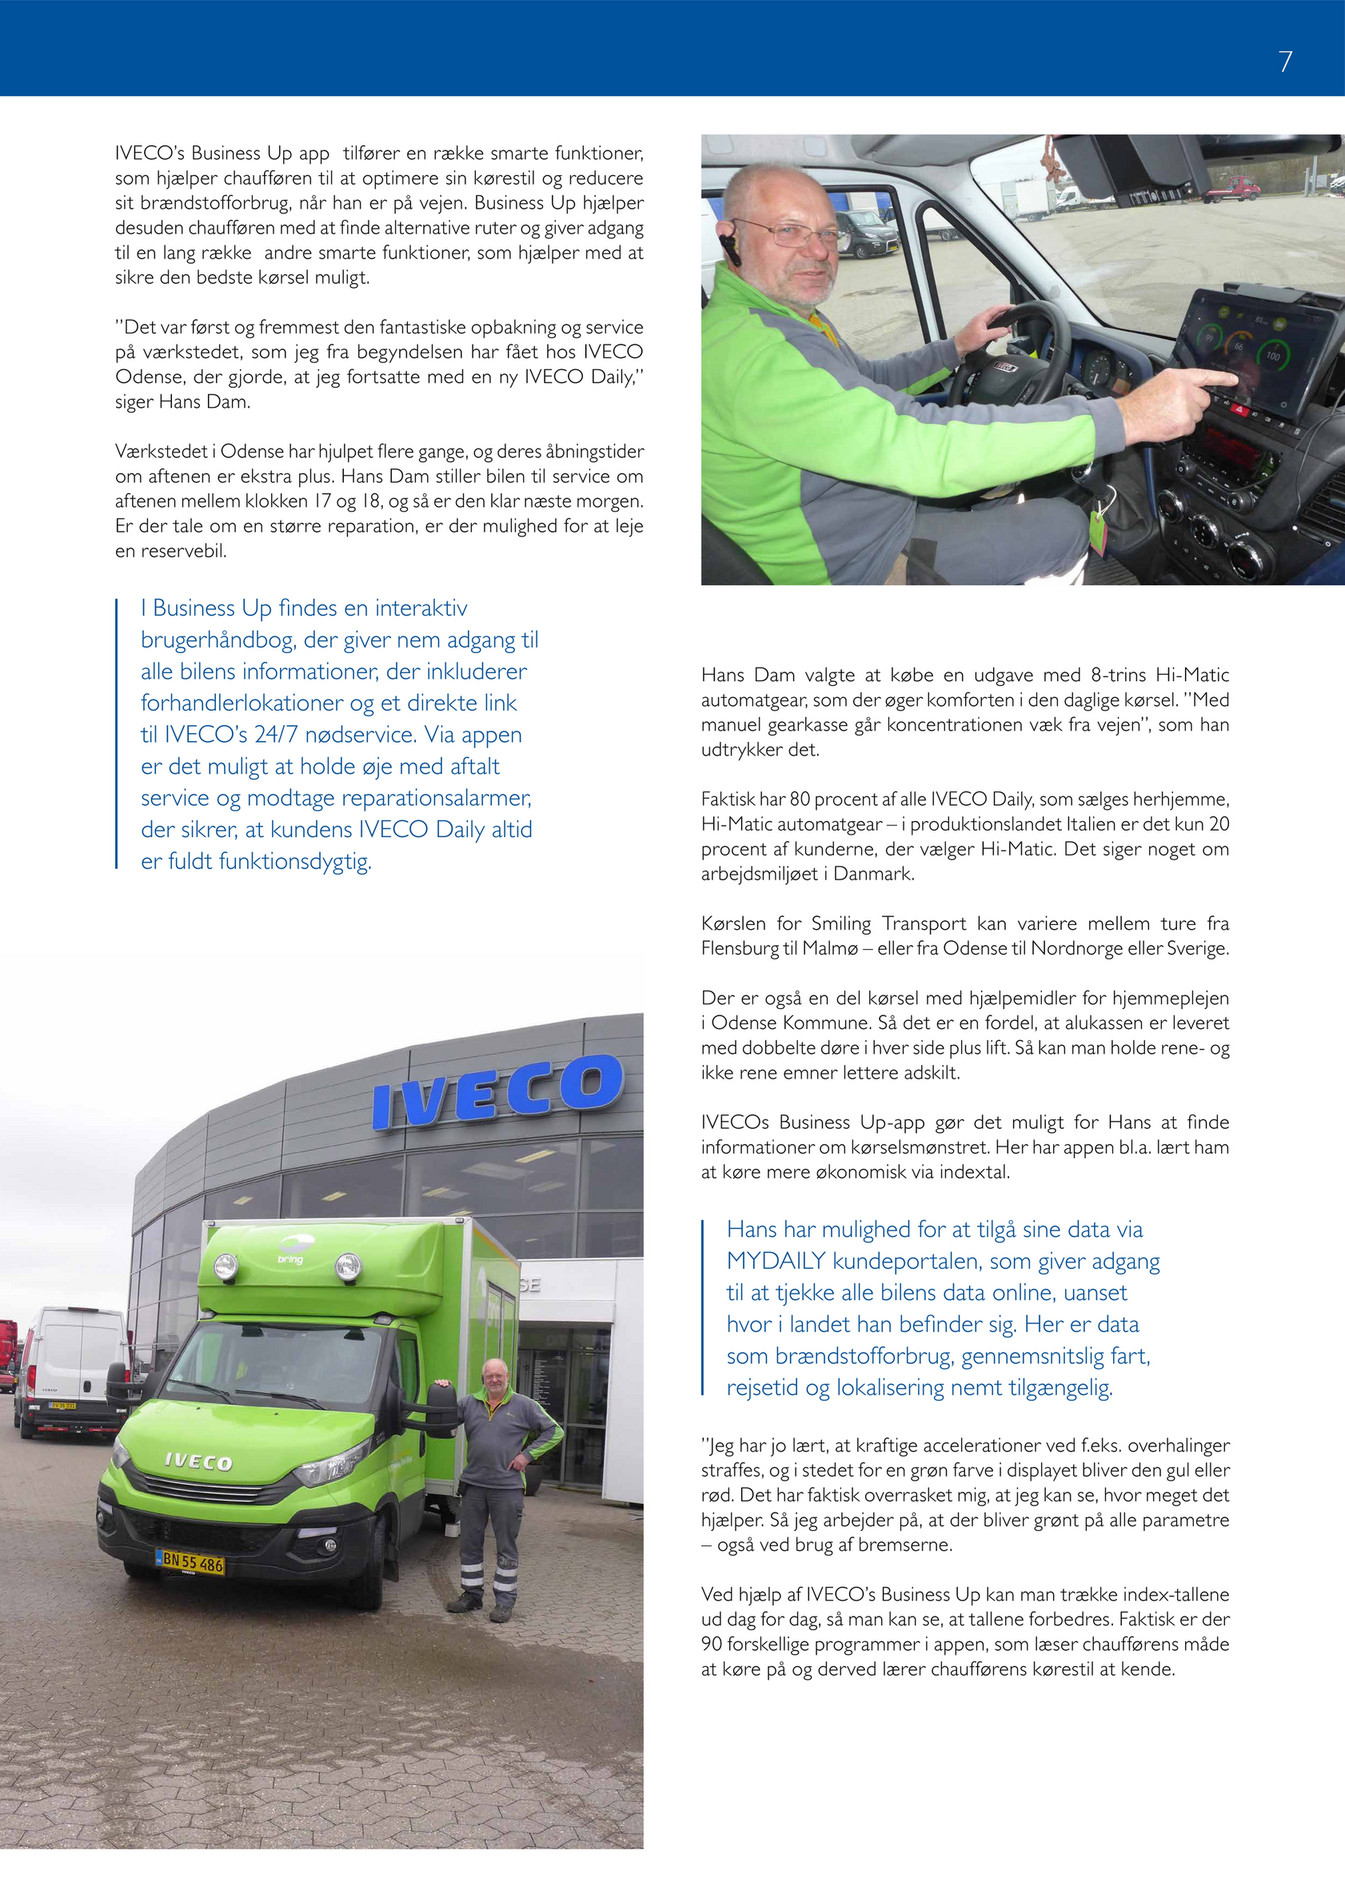 IVECO - Iveco&You SOMMER 2018 - Page 2-3 Created with Publitas.com